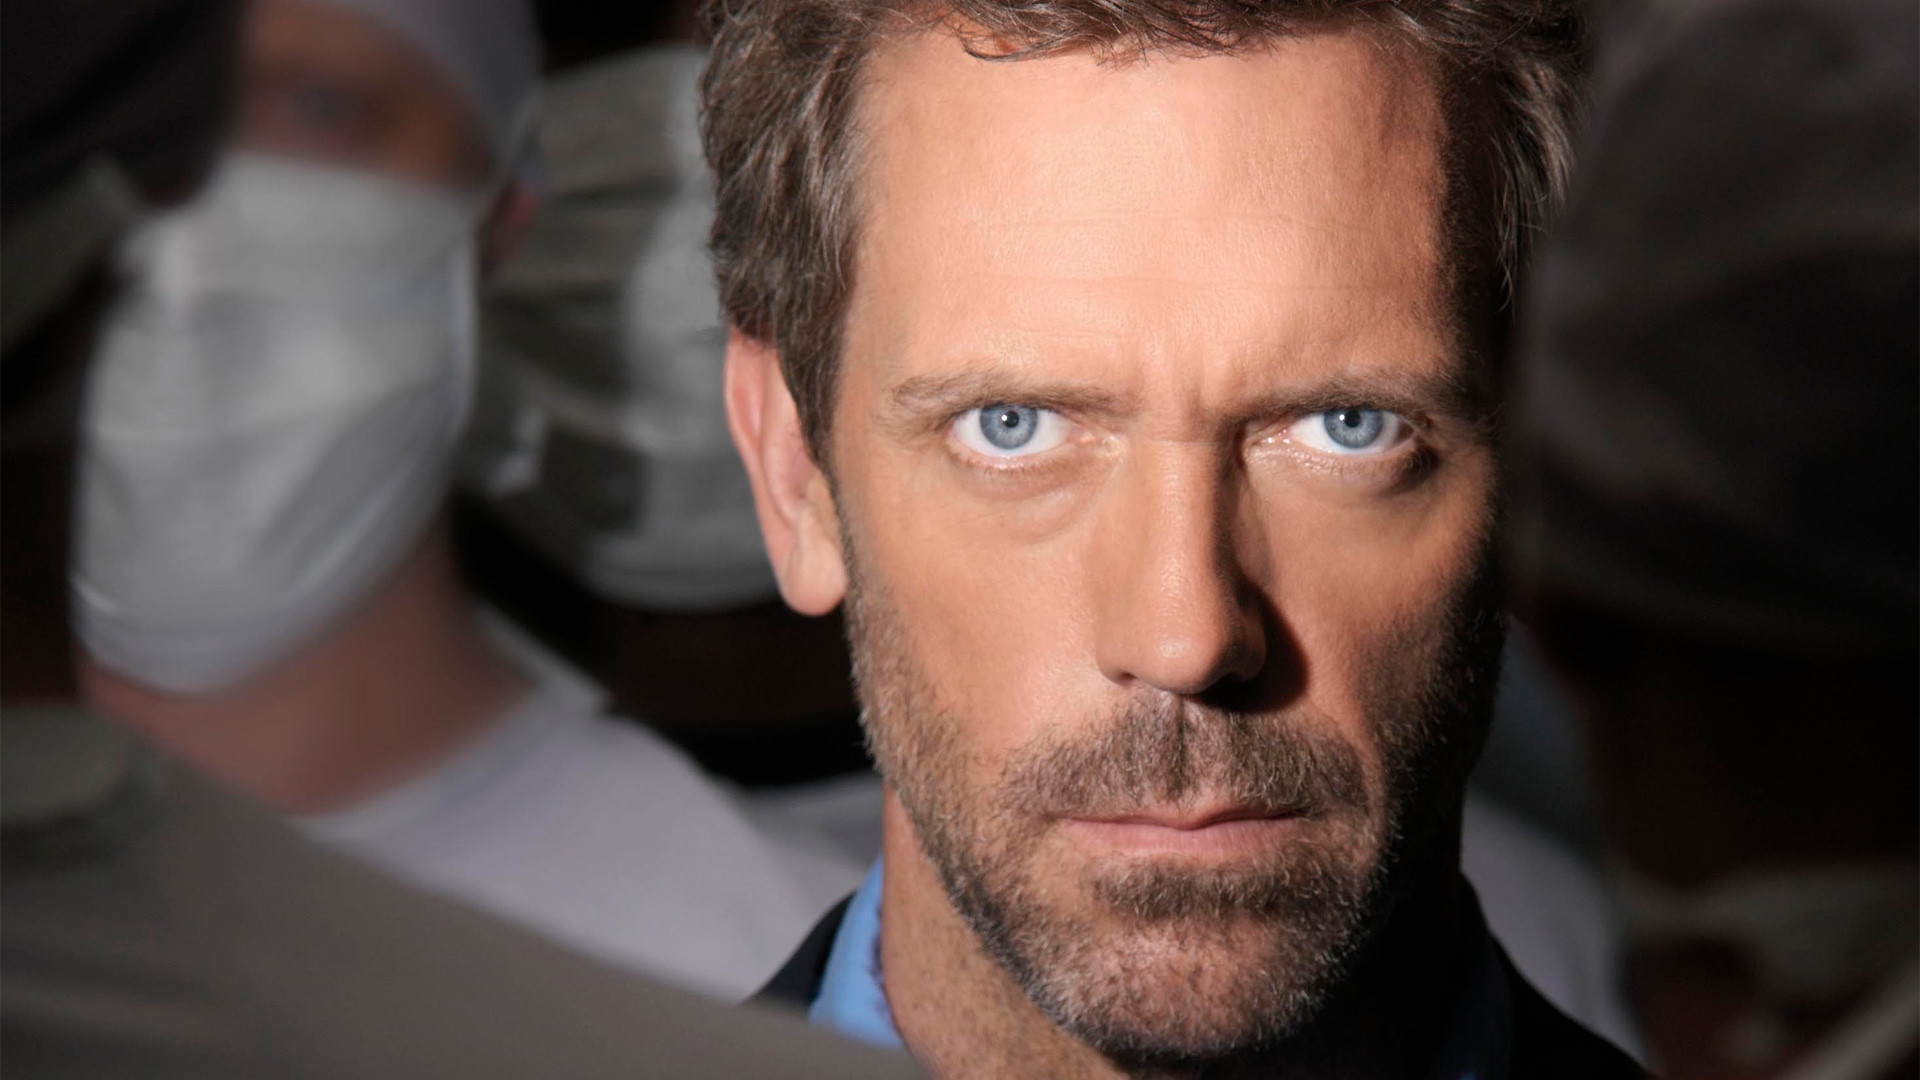 House Md Iphone Wallpaper